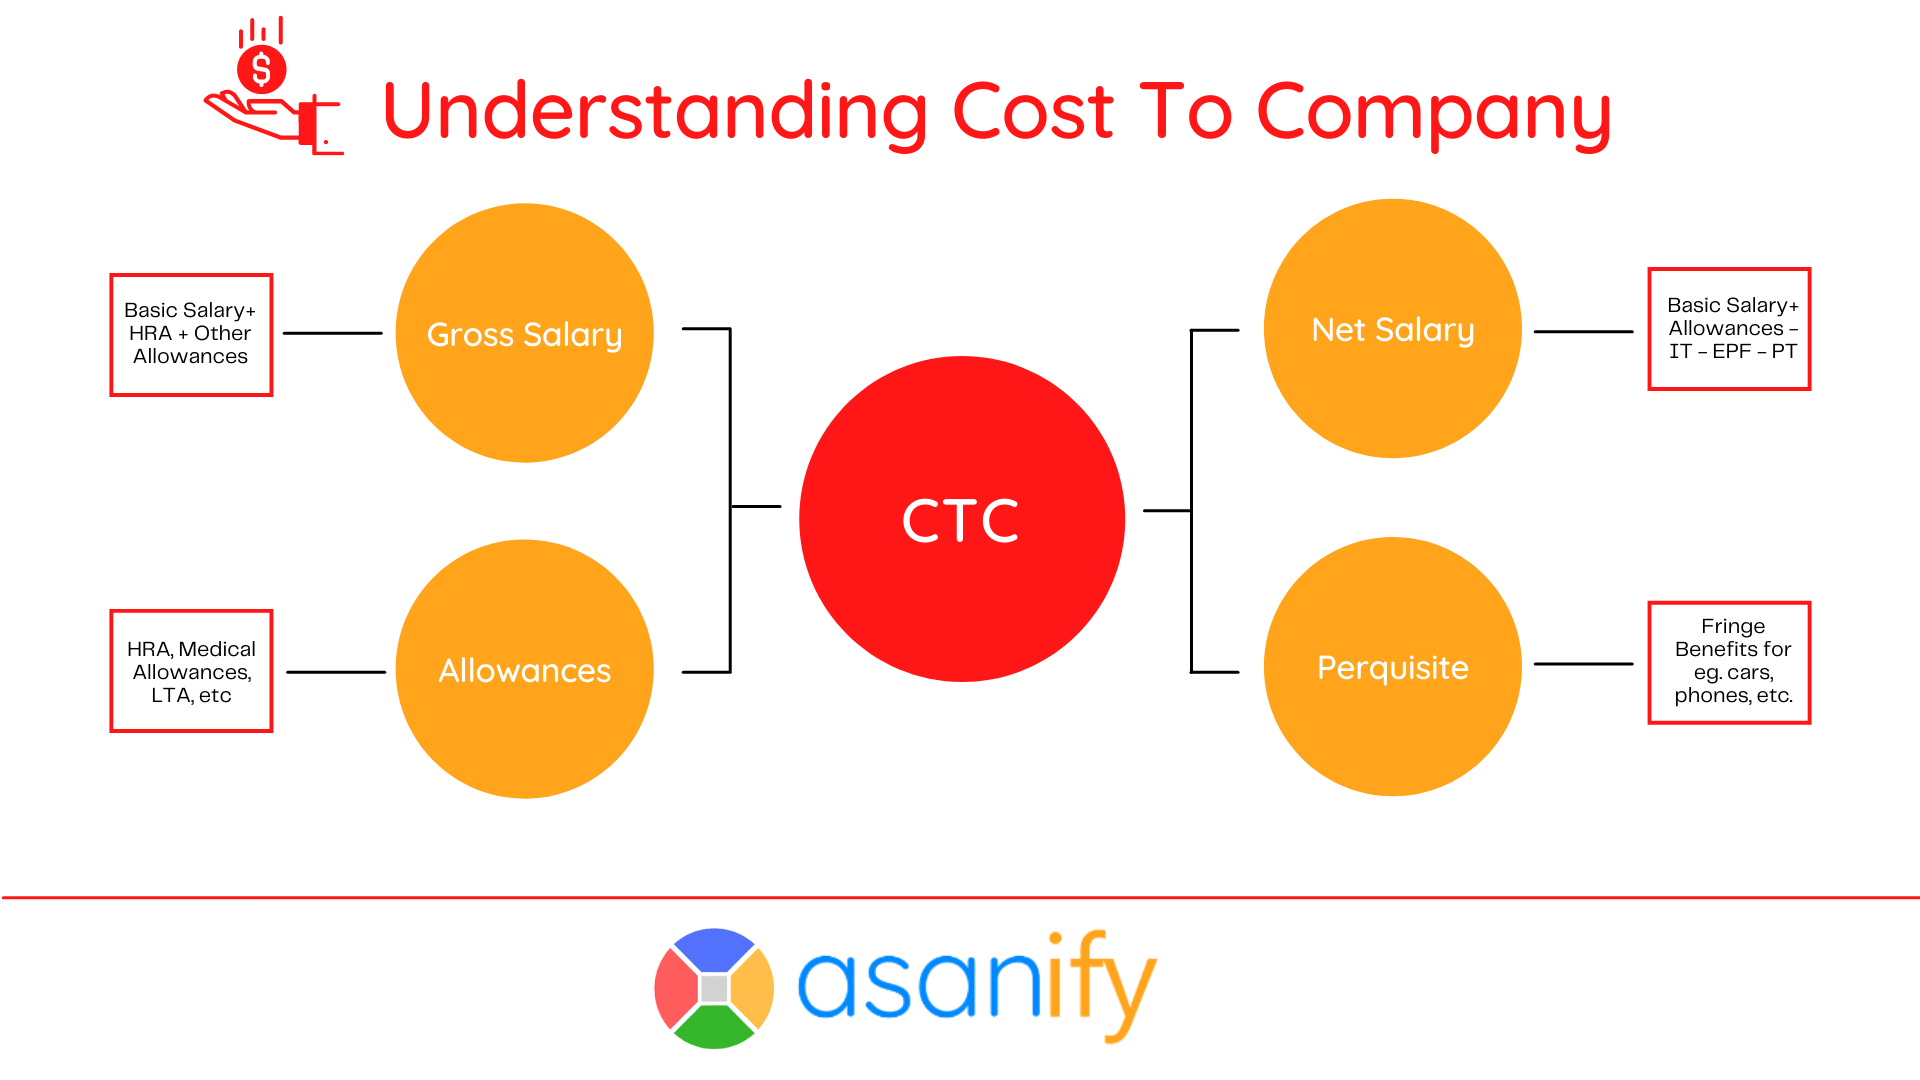 Cost to Company explained